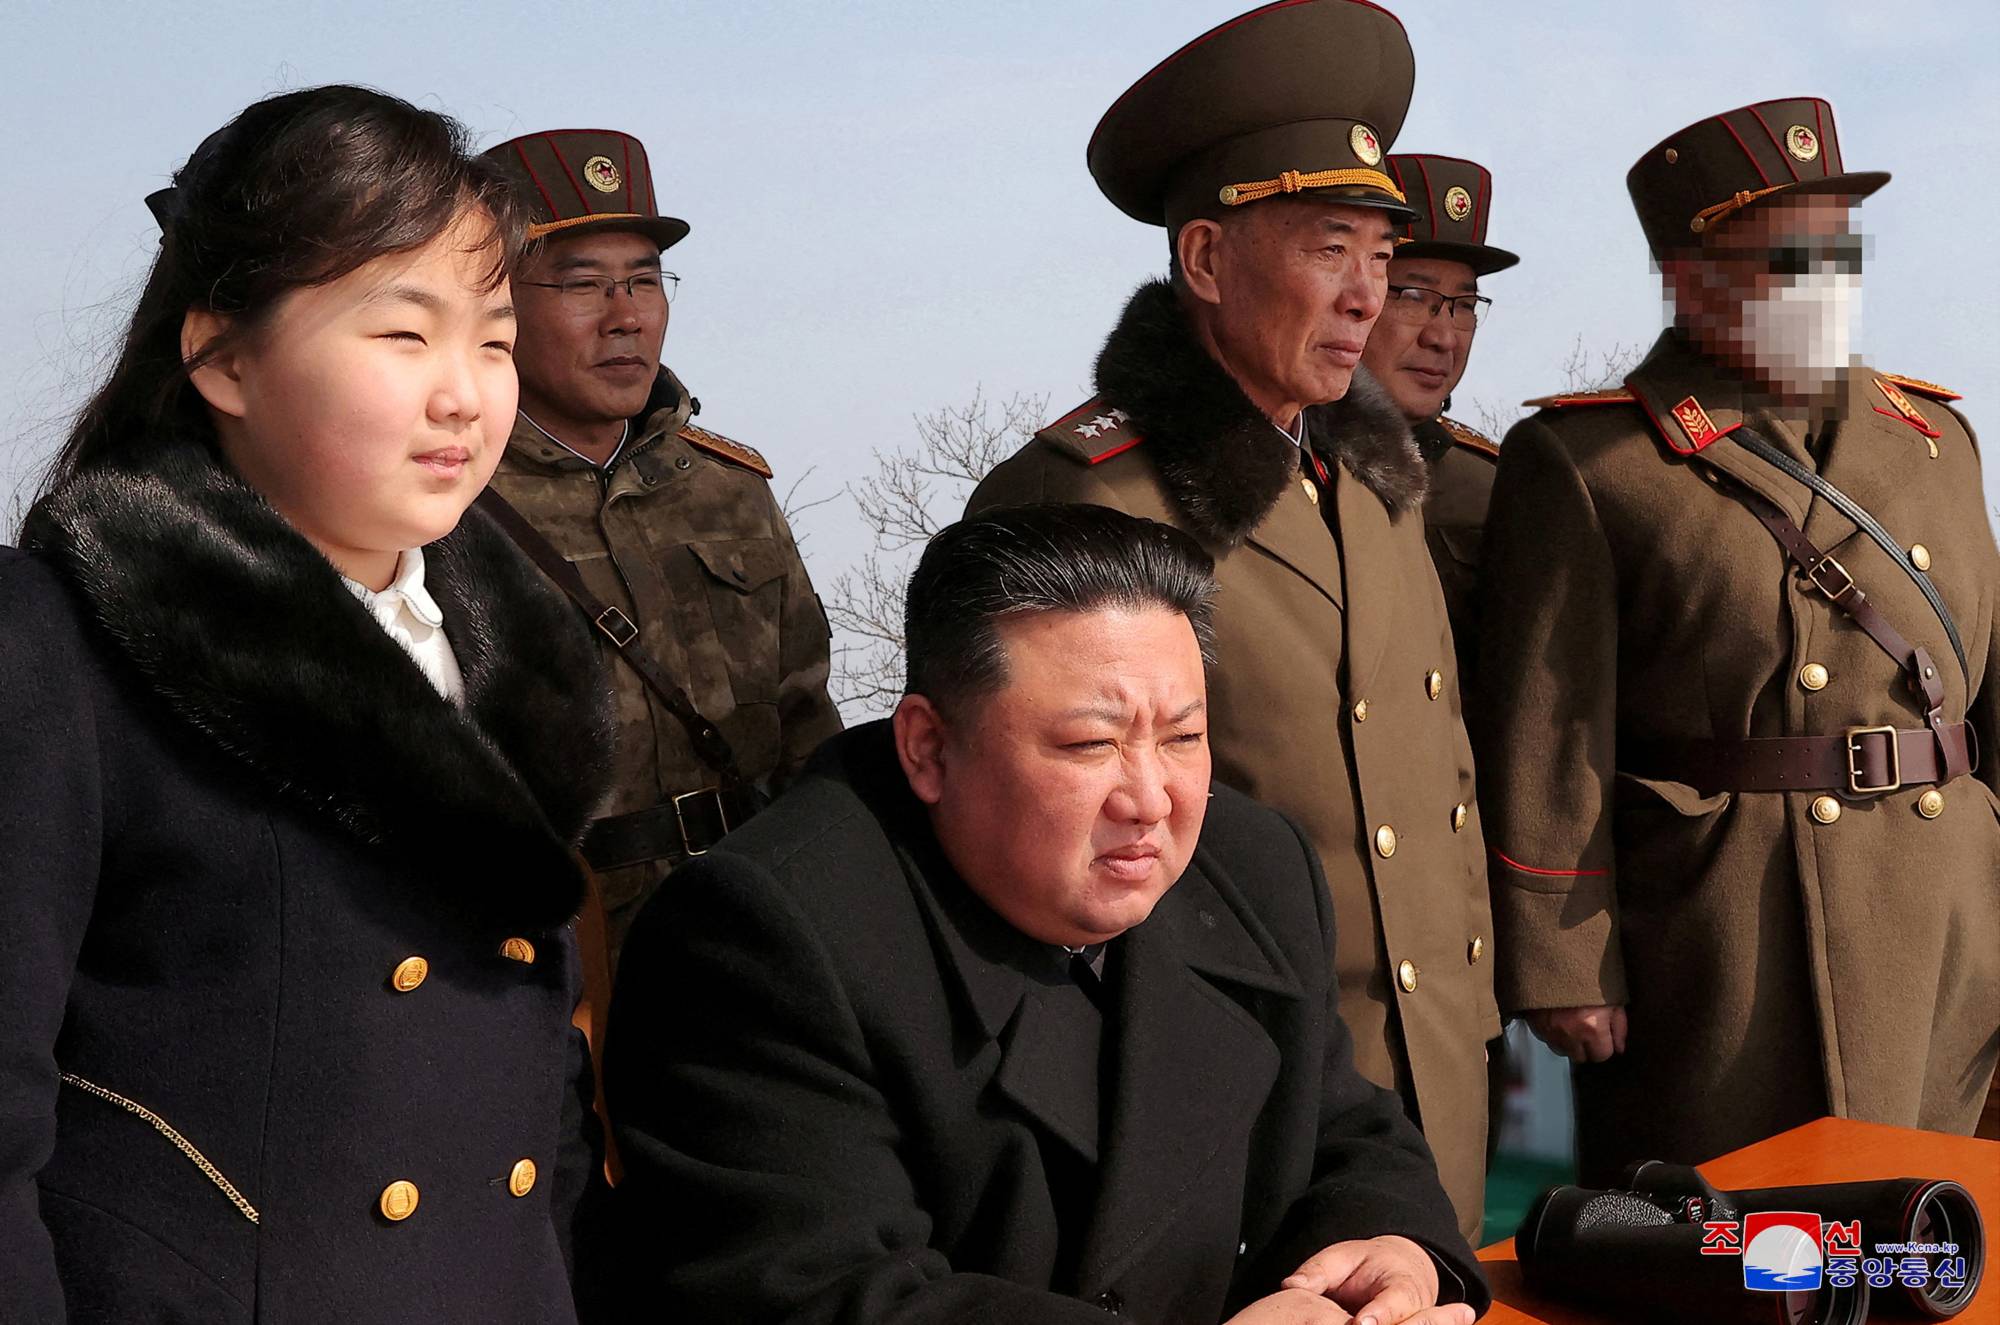 North Korean leader Kim Jong Un and his daughter, Ju Ae, watch a missile drill at an undisclosed location in this image released on Monday. | KCNA / VIA REUTERS  